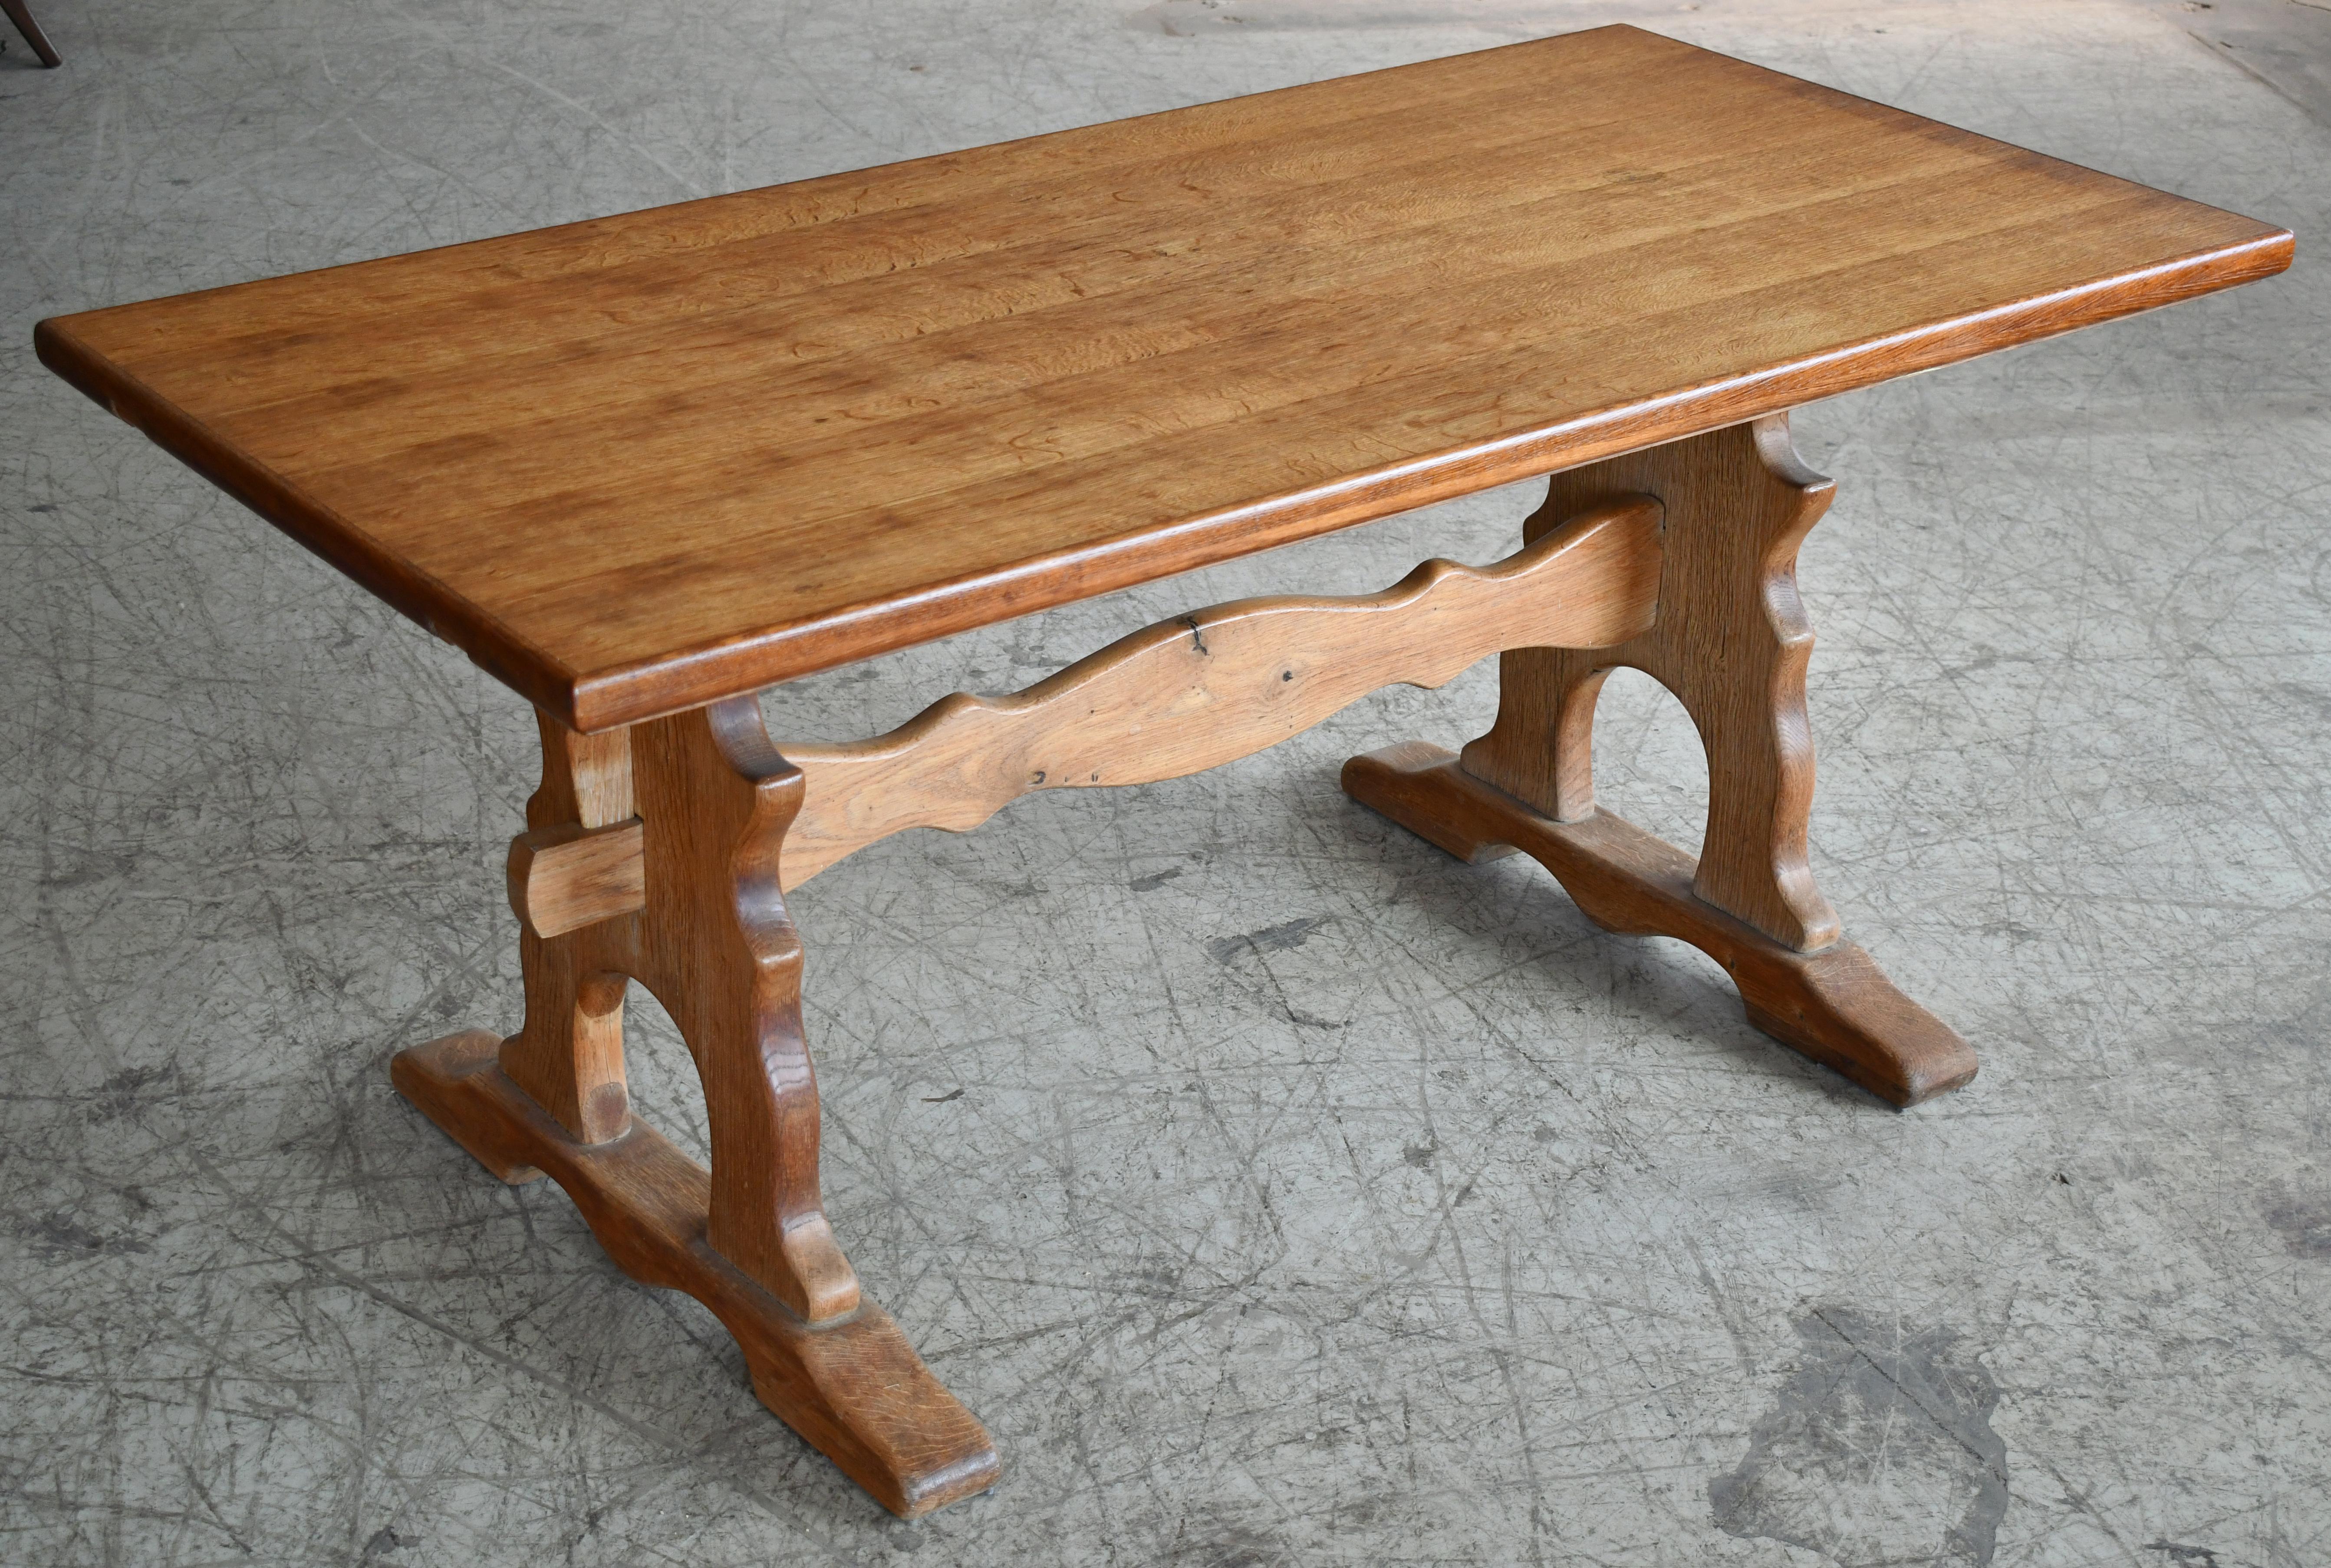 Great dining table in solid oak made in Denmark probably around 1960's. These style table was common from about 1880 and found popularity again in the 1960's and 70's. We believe this is if the newer kind based on the size and signs of wear. Great